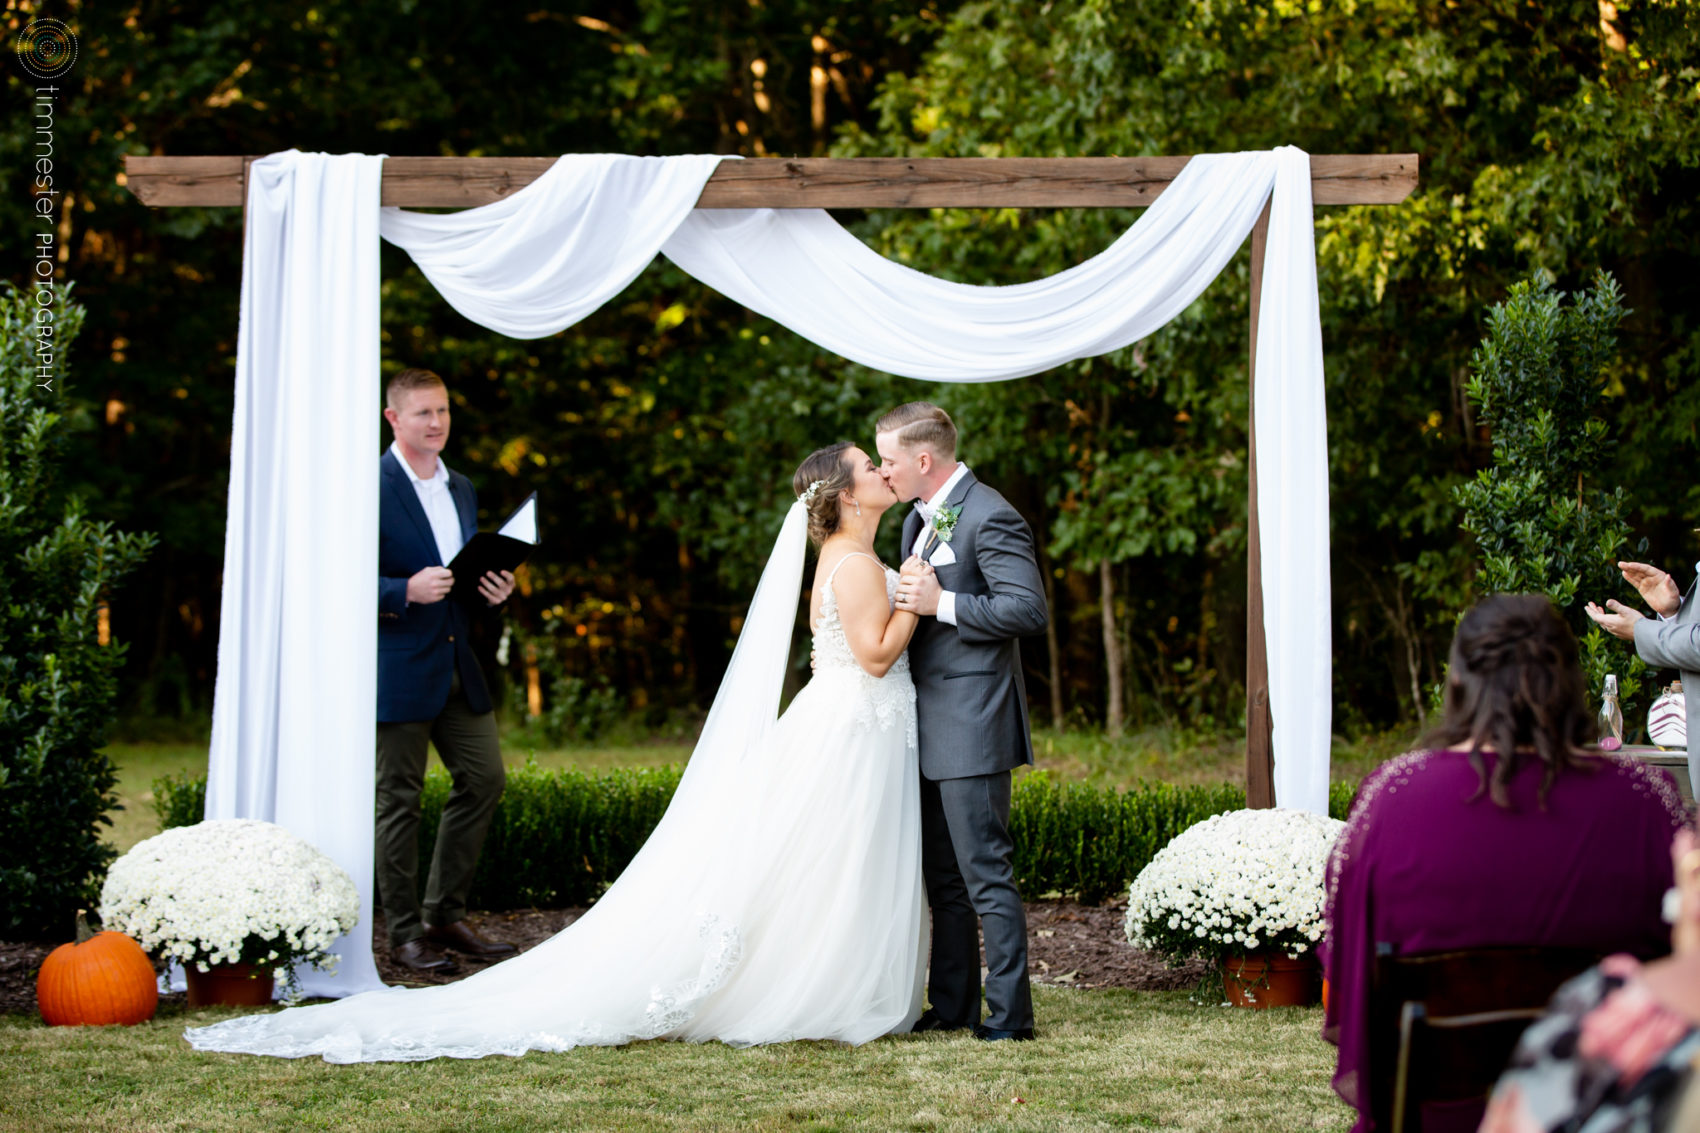 The first kiss as husband and wife at Sugarneck wedding venue in NC